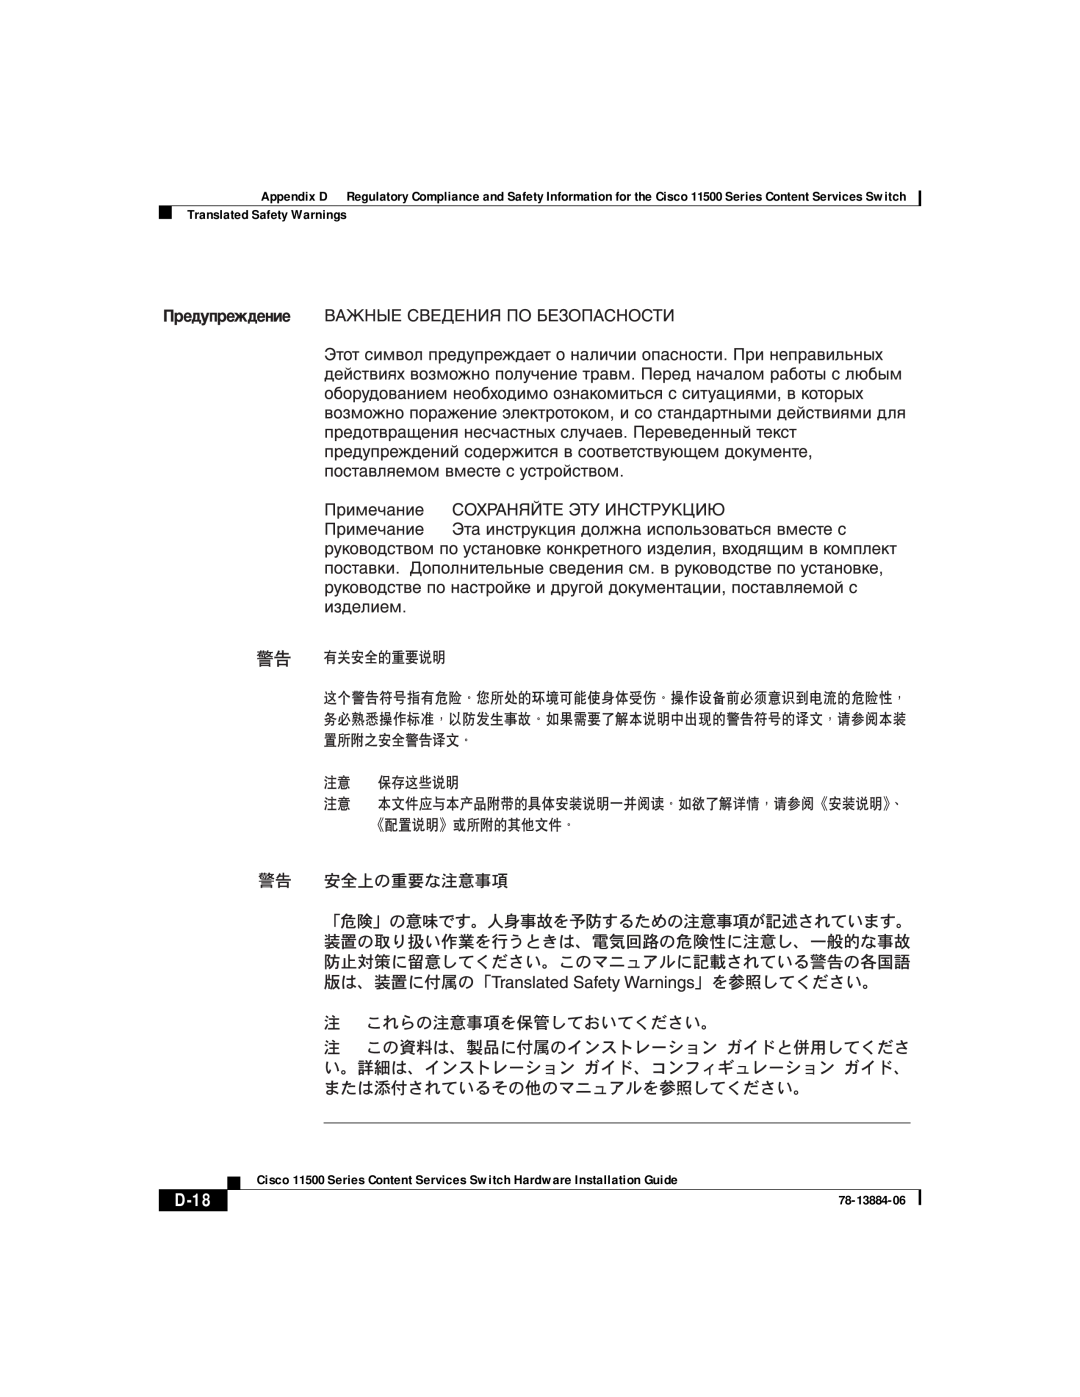 Cisco Systems 11501, 11506, 11503, 11500 appendix D-18, Translated Safety Warnings, 78-13884-06 